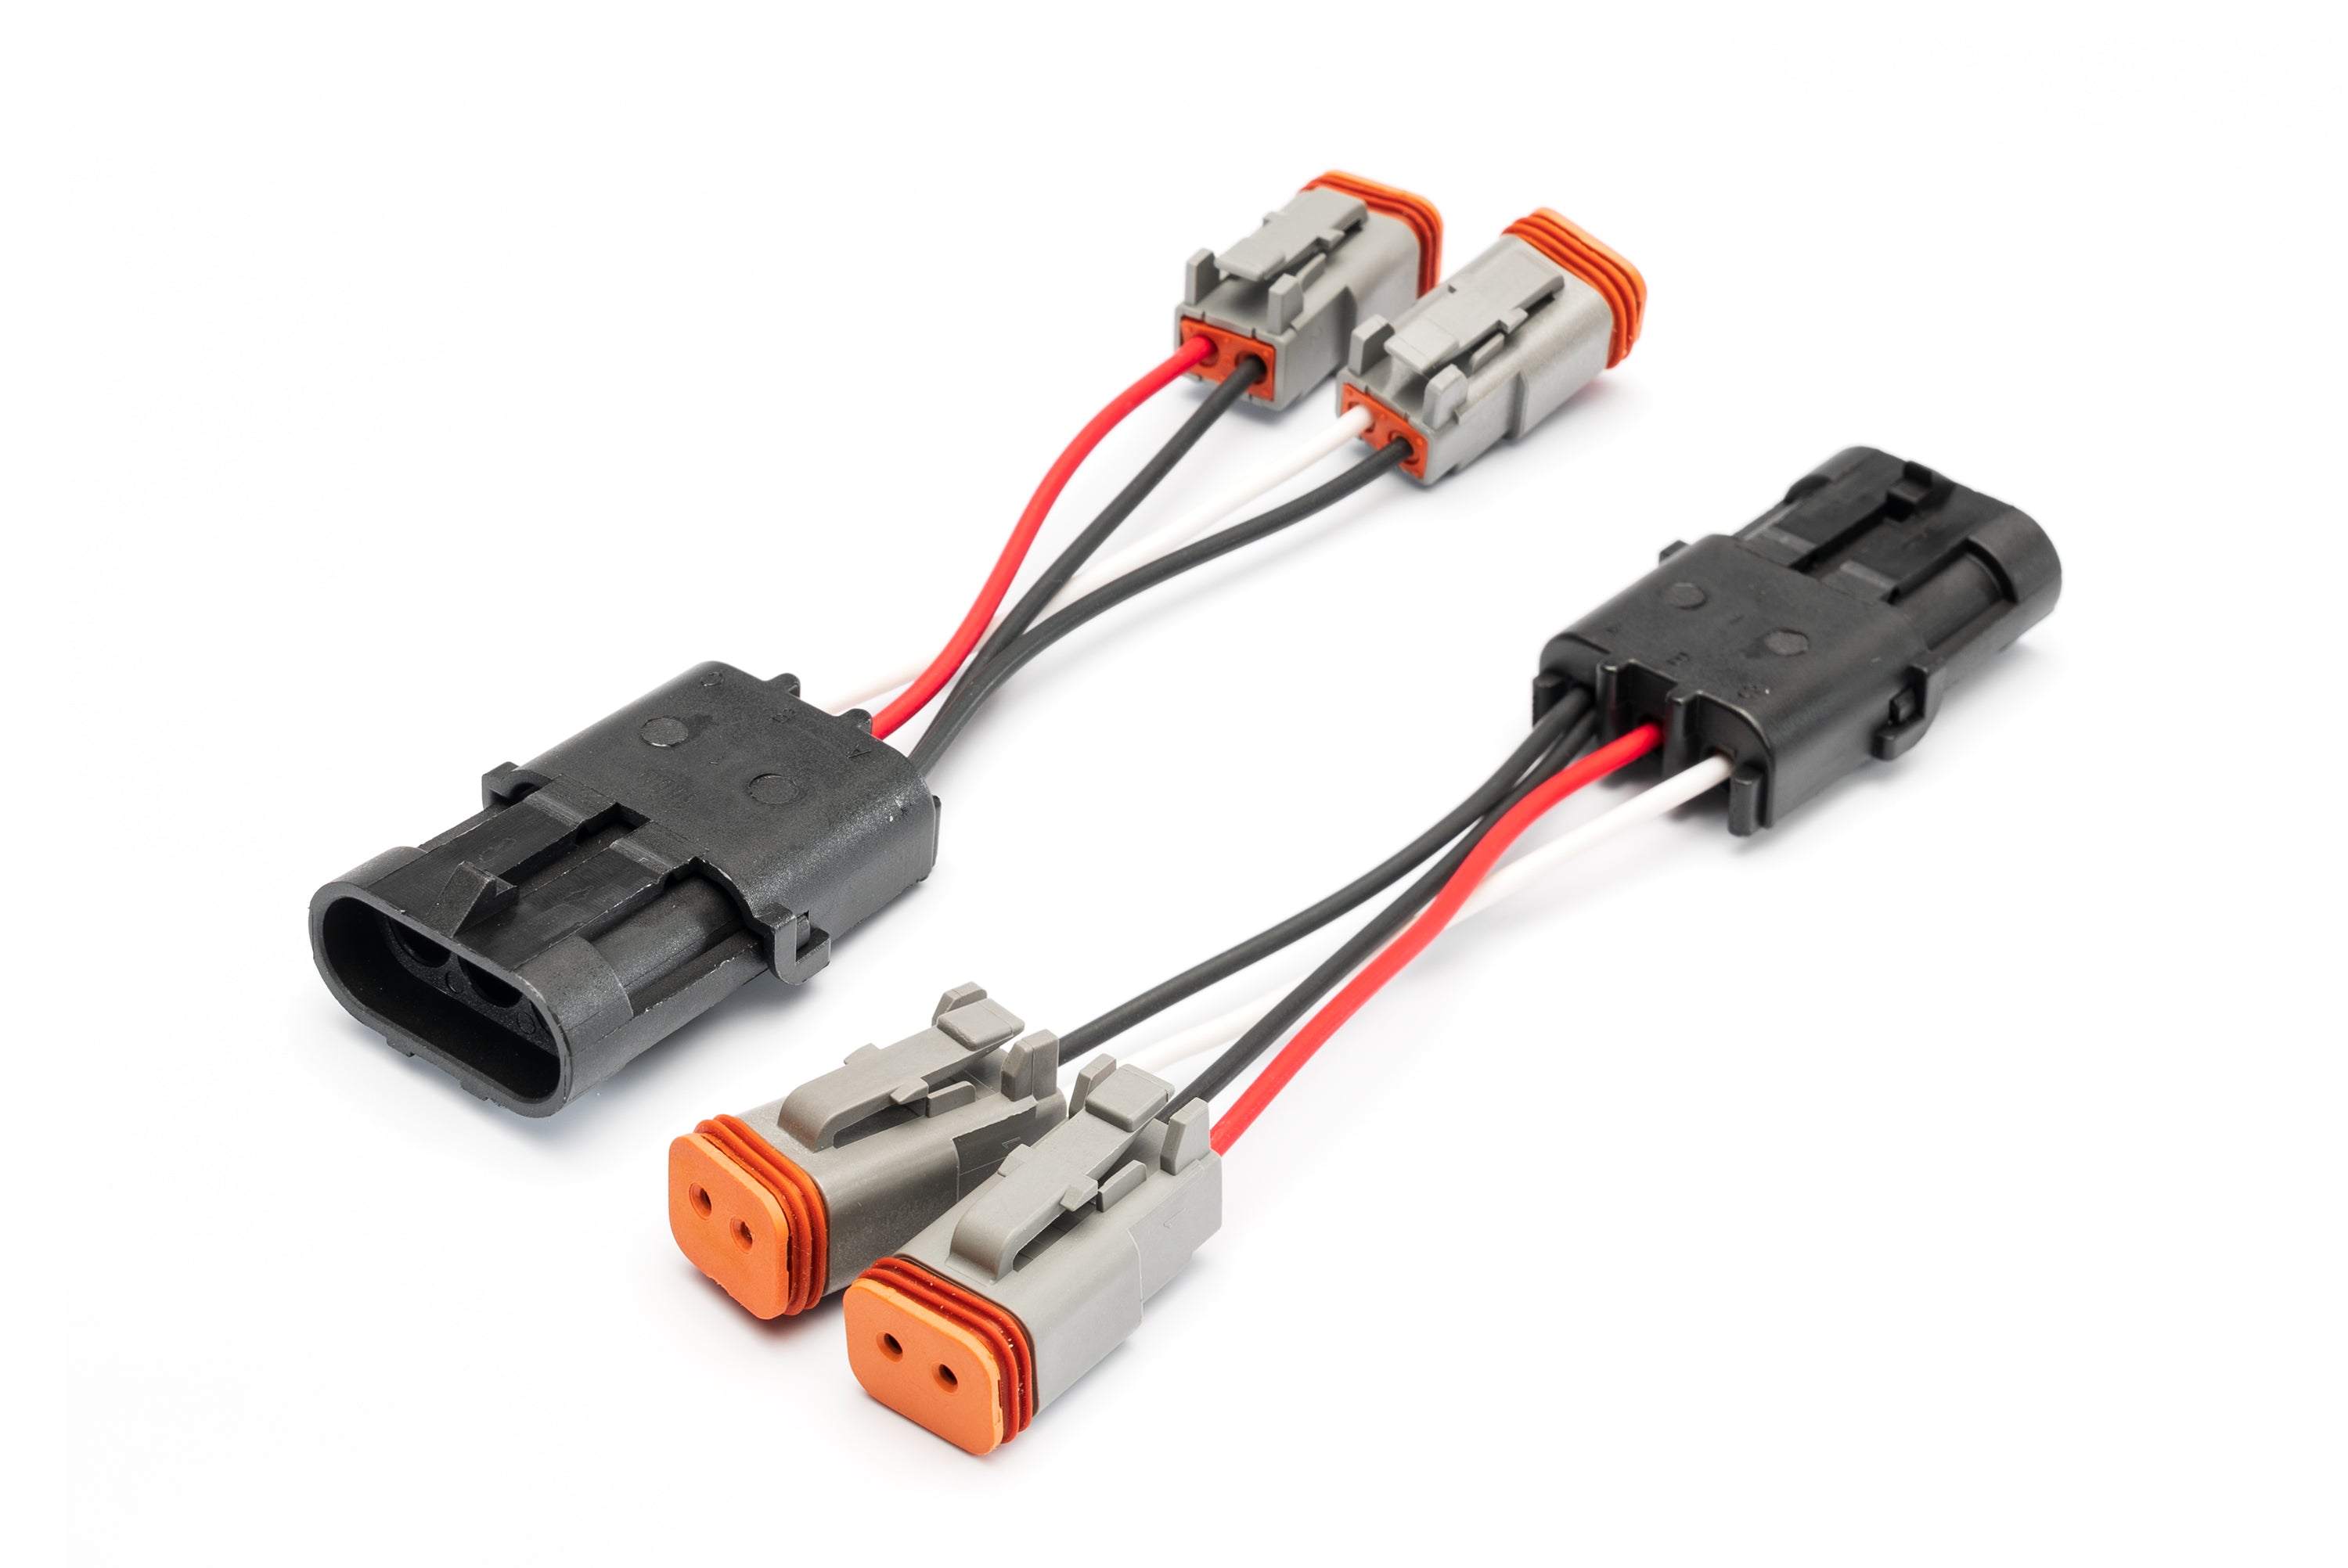 SPV Parts Harness 2 Pole DT Connector CROSSOVER Adapter SPLITTERS (Pair) - SPV Harness System (Works with MANY vehicles, See Details)